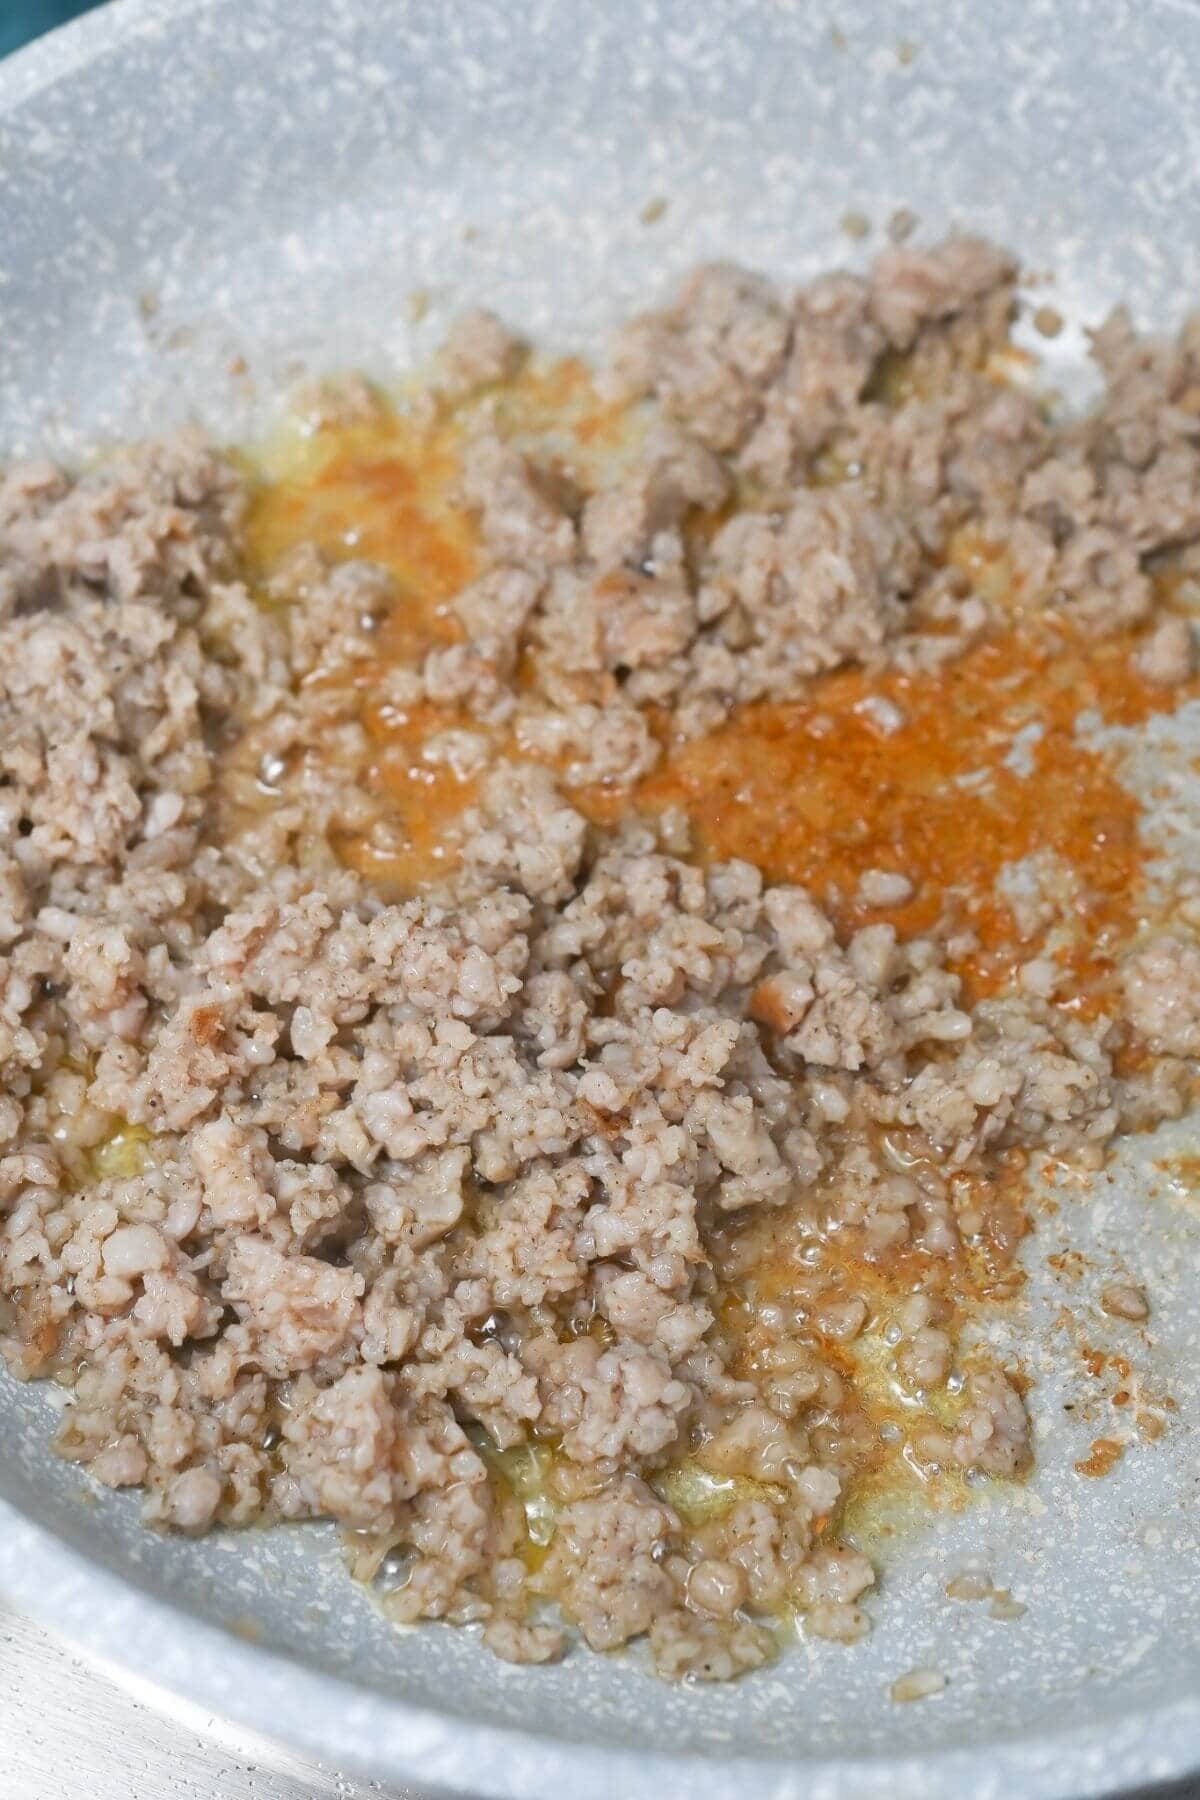 Ground sausage cooking in a pan with oil.